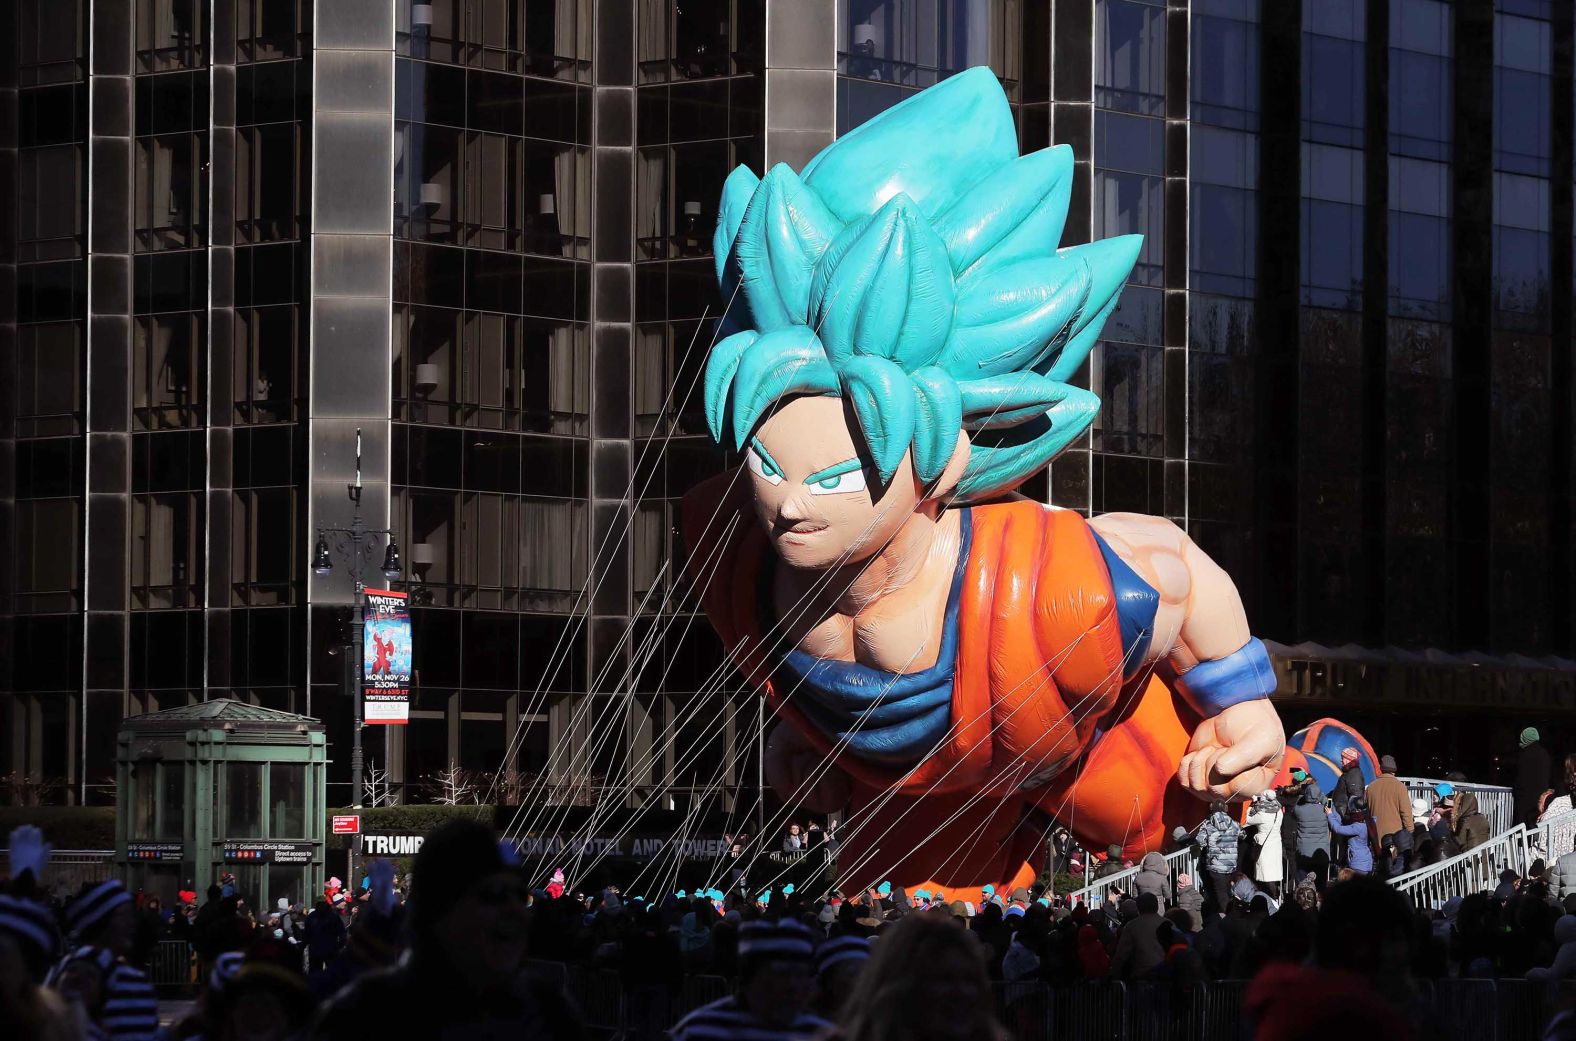 A Goku float from the "Dragon Ball" anime series makes its way through the street.